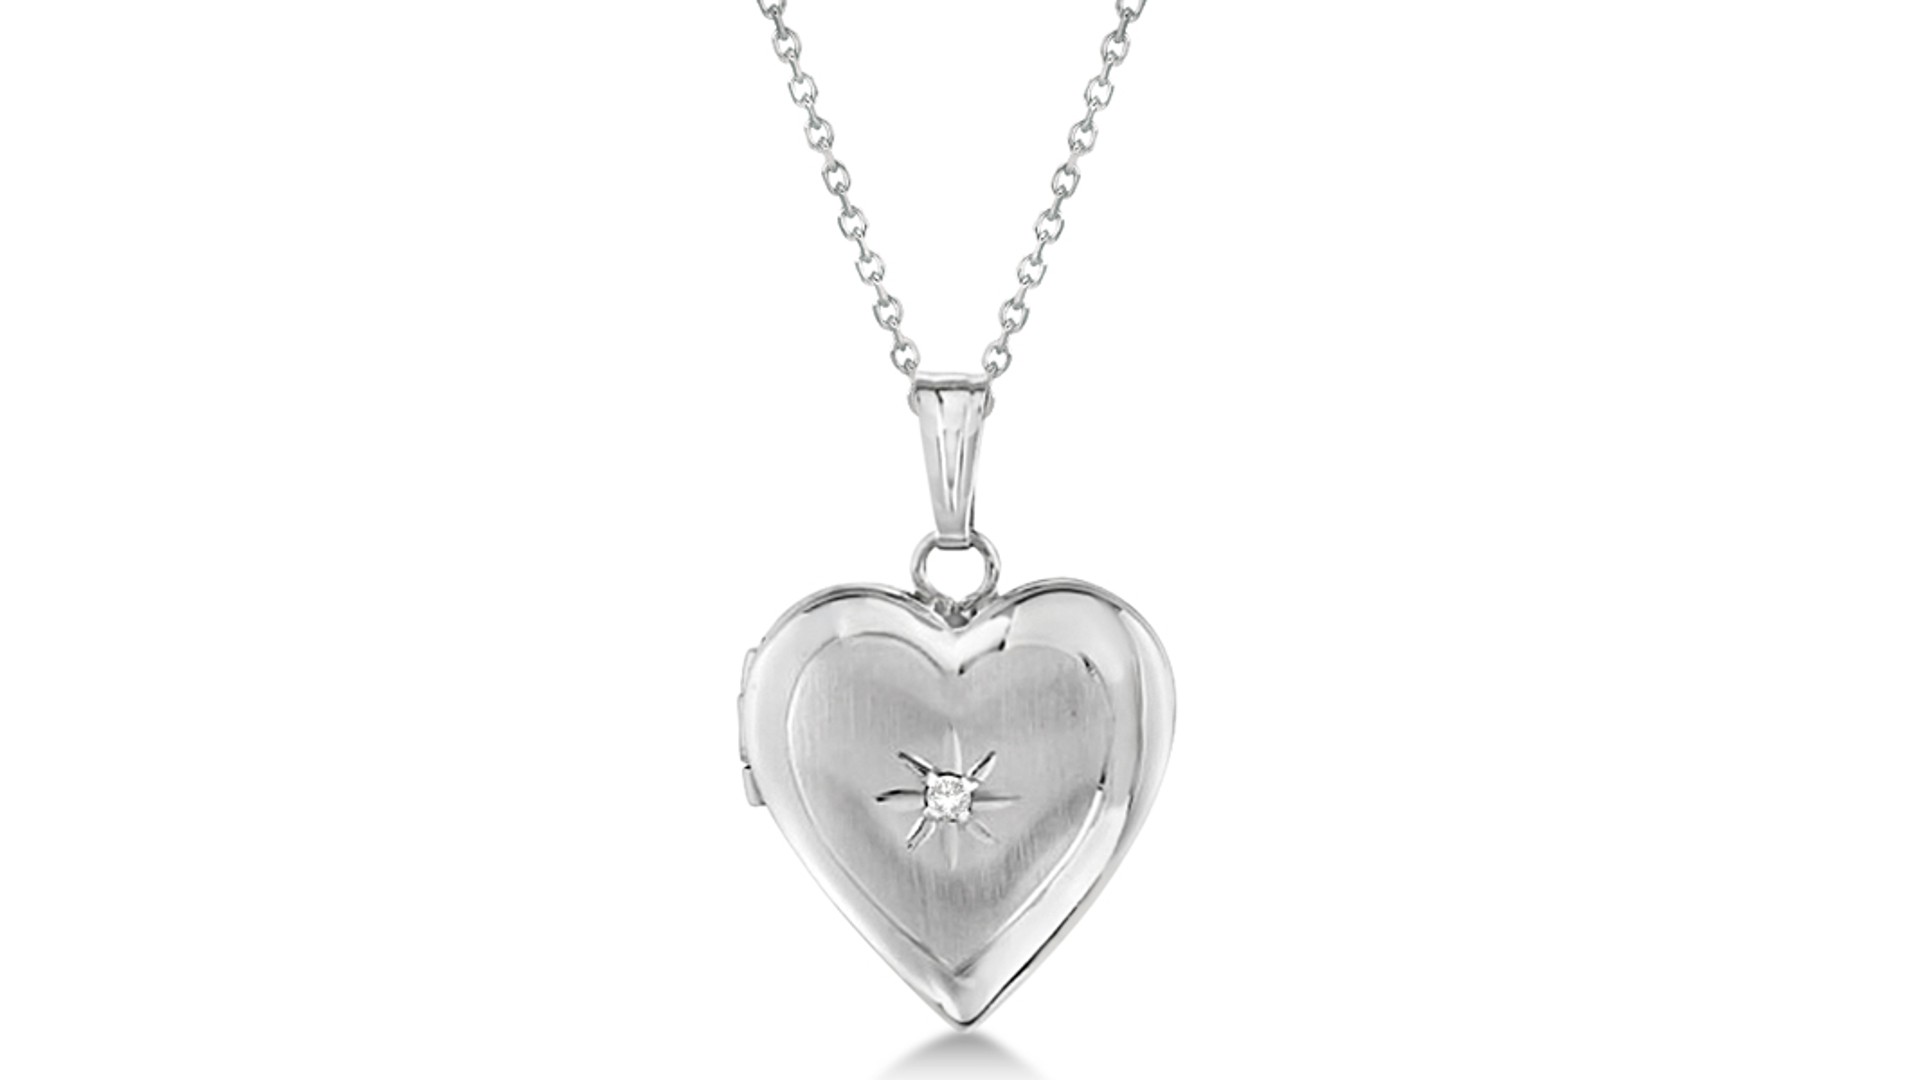 Valentine’s Day Gift Guide: Petite Heart Photo Locket With Diamond Accent